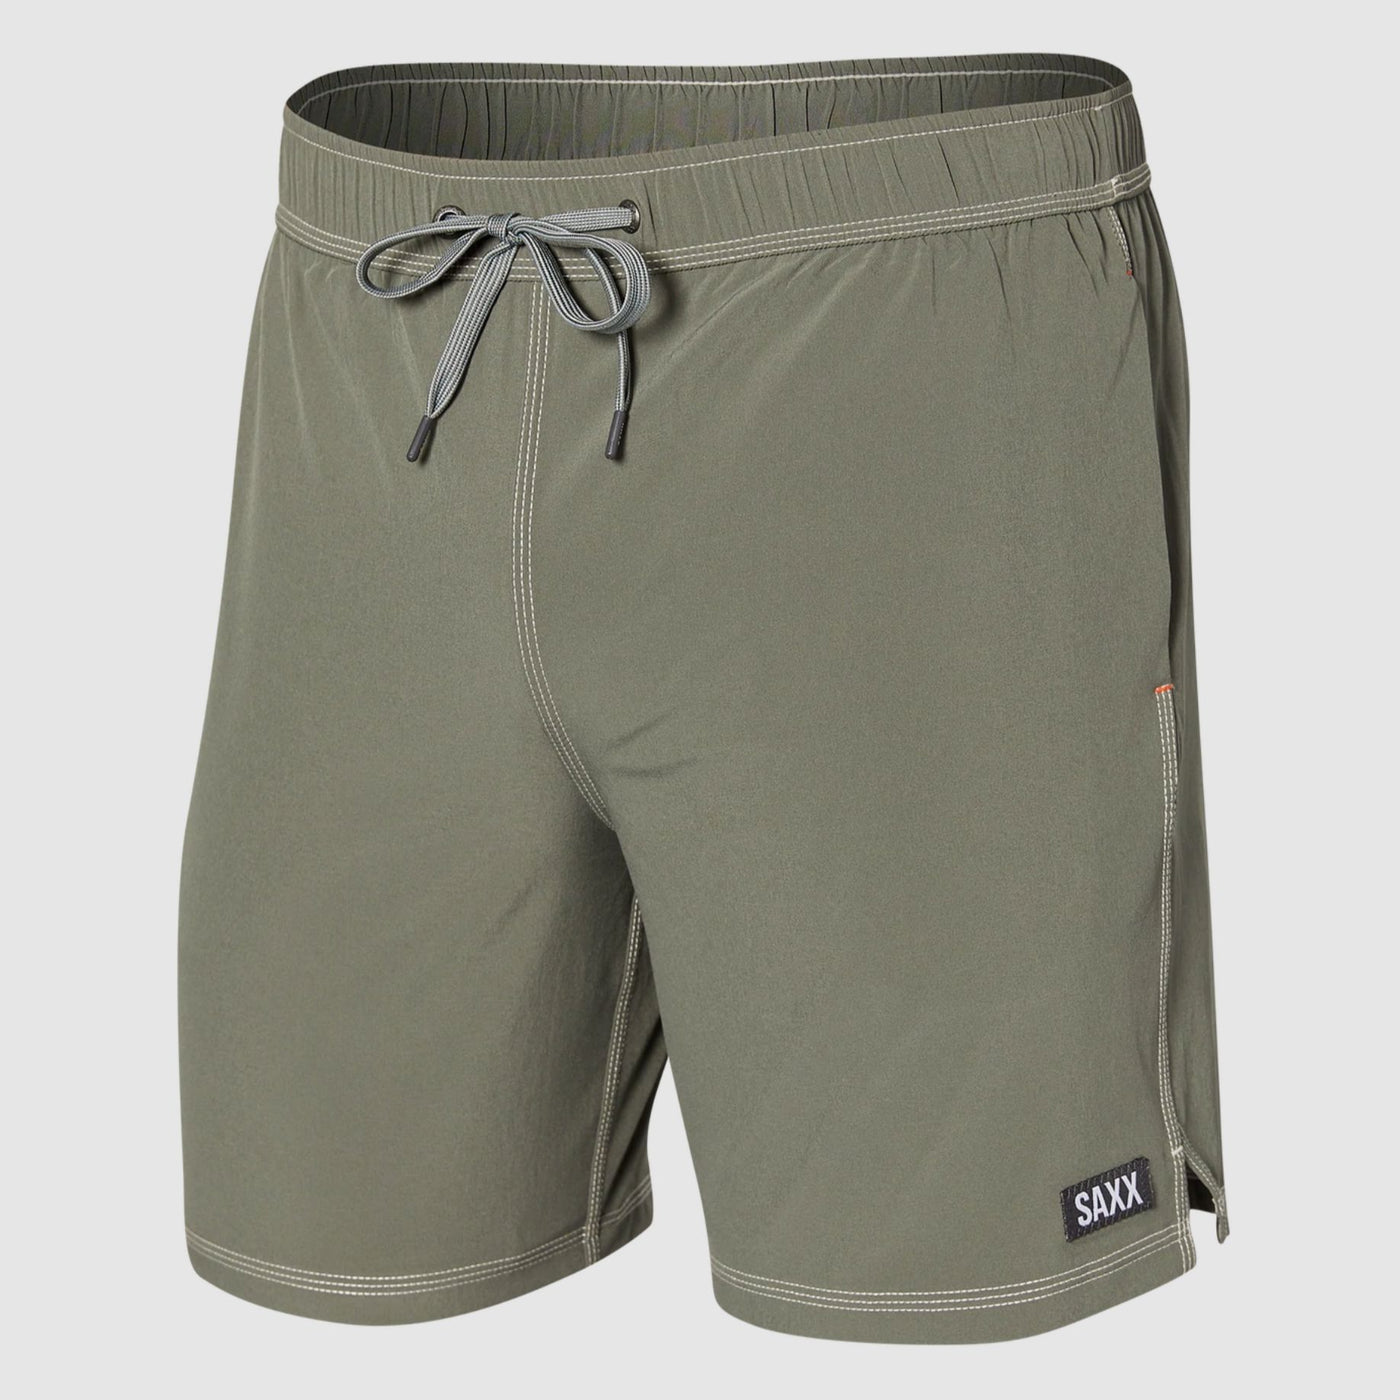 SAXX Oh Buoy Men's 5" Swim Trunks in Cargo Grey-Mens-SAXX-Cargo Grey-Small-Anna Bella Fine Lingerie, Reveal Your Most Gorgeous Self!